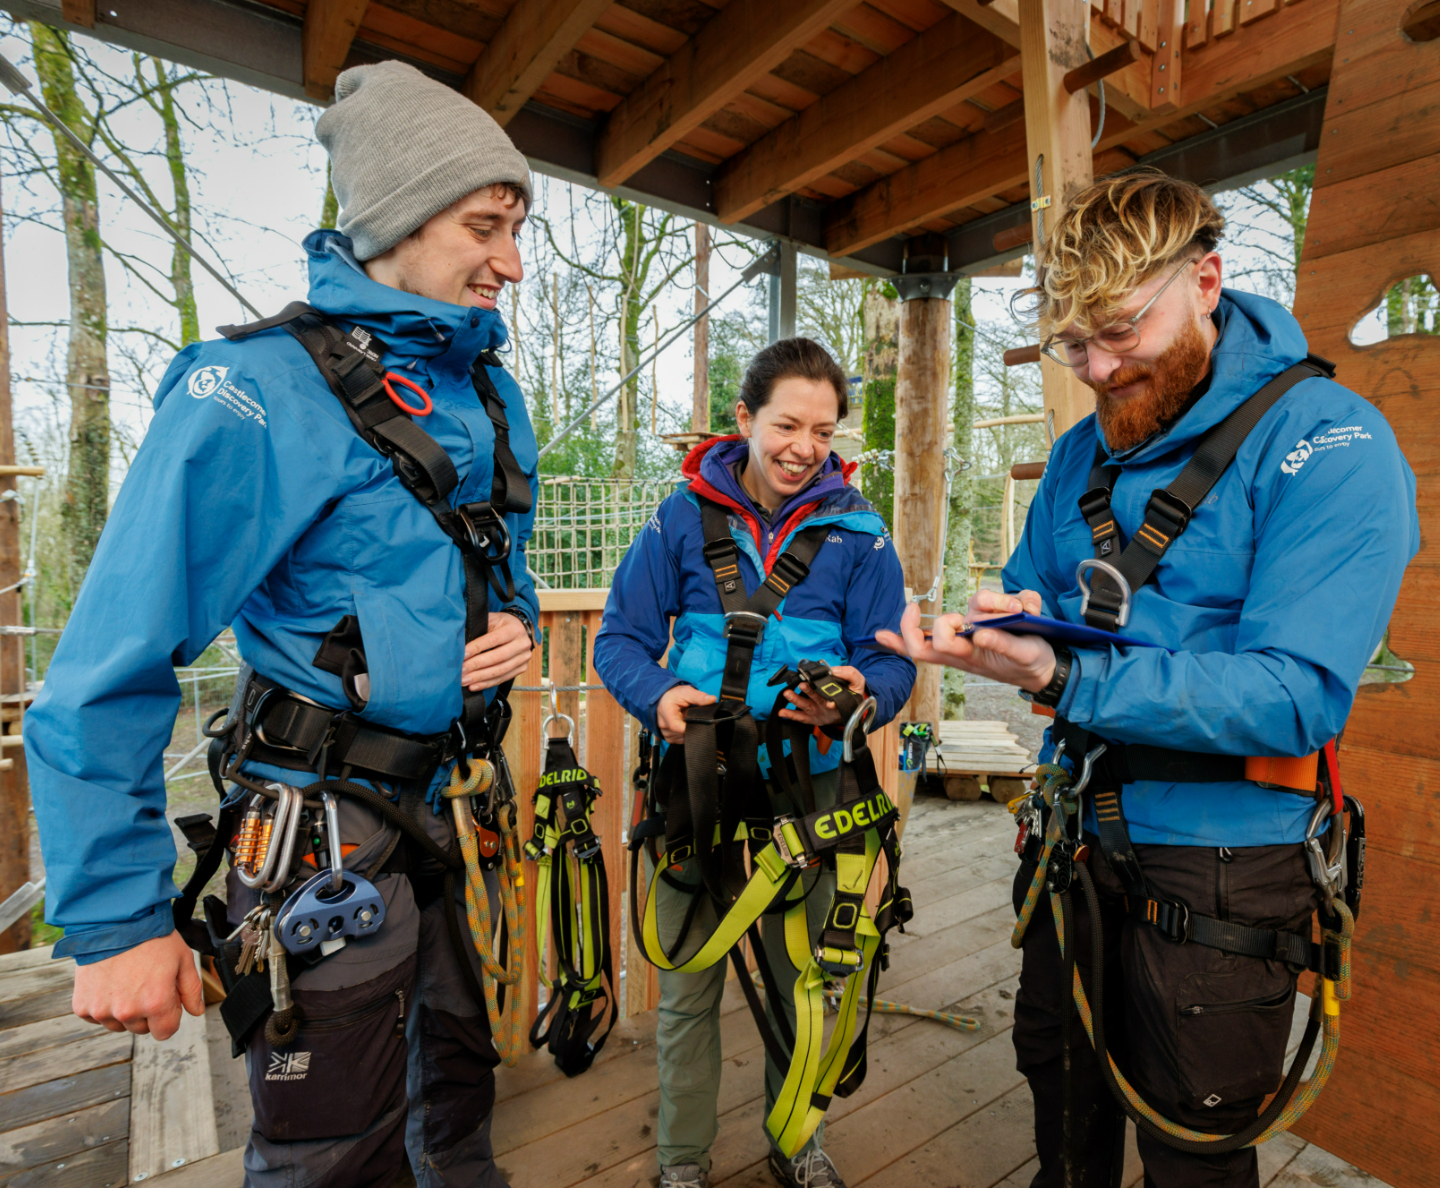 Three people with climbing gear